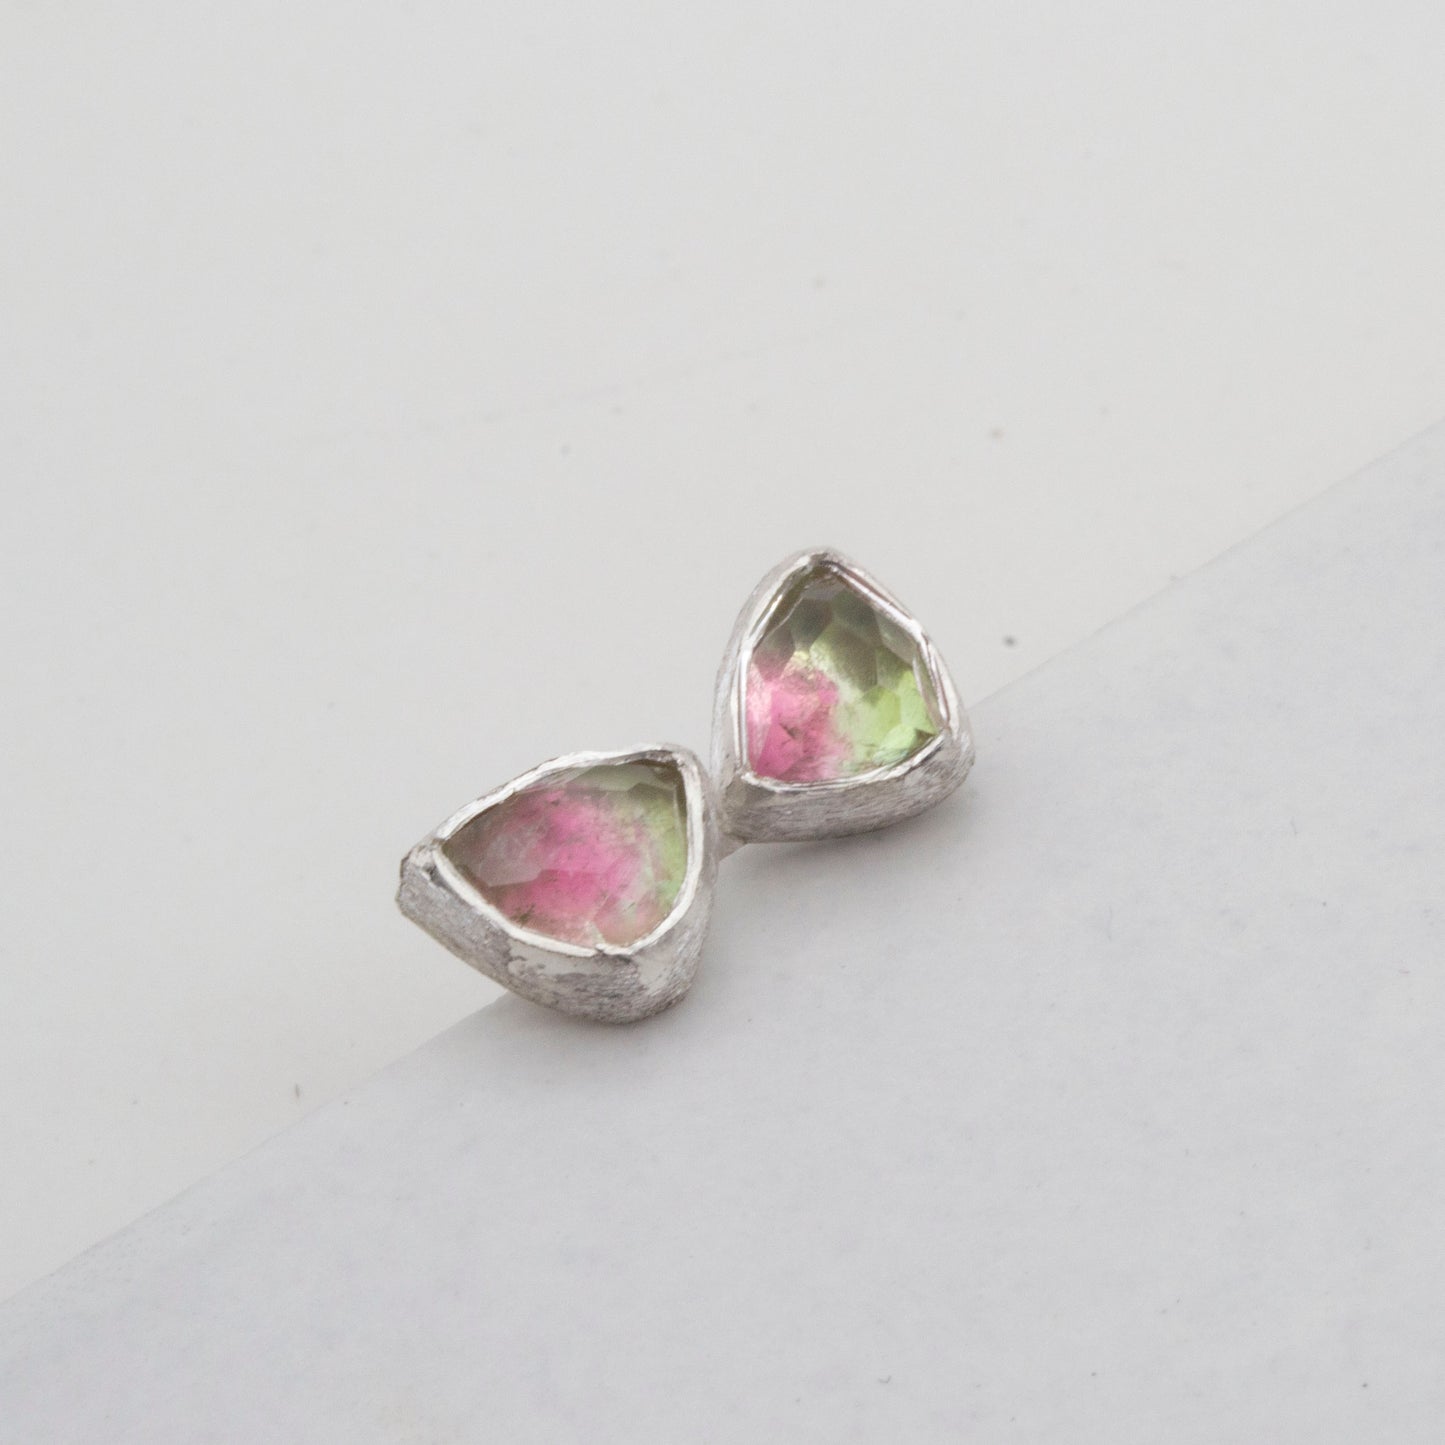 Pink and green tourmaline stud earrings